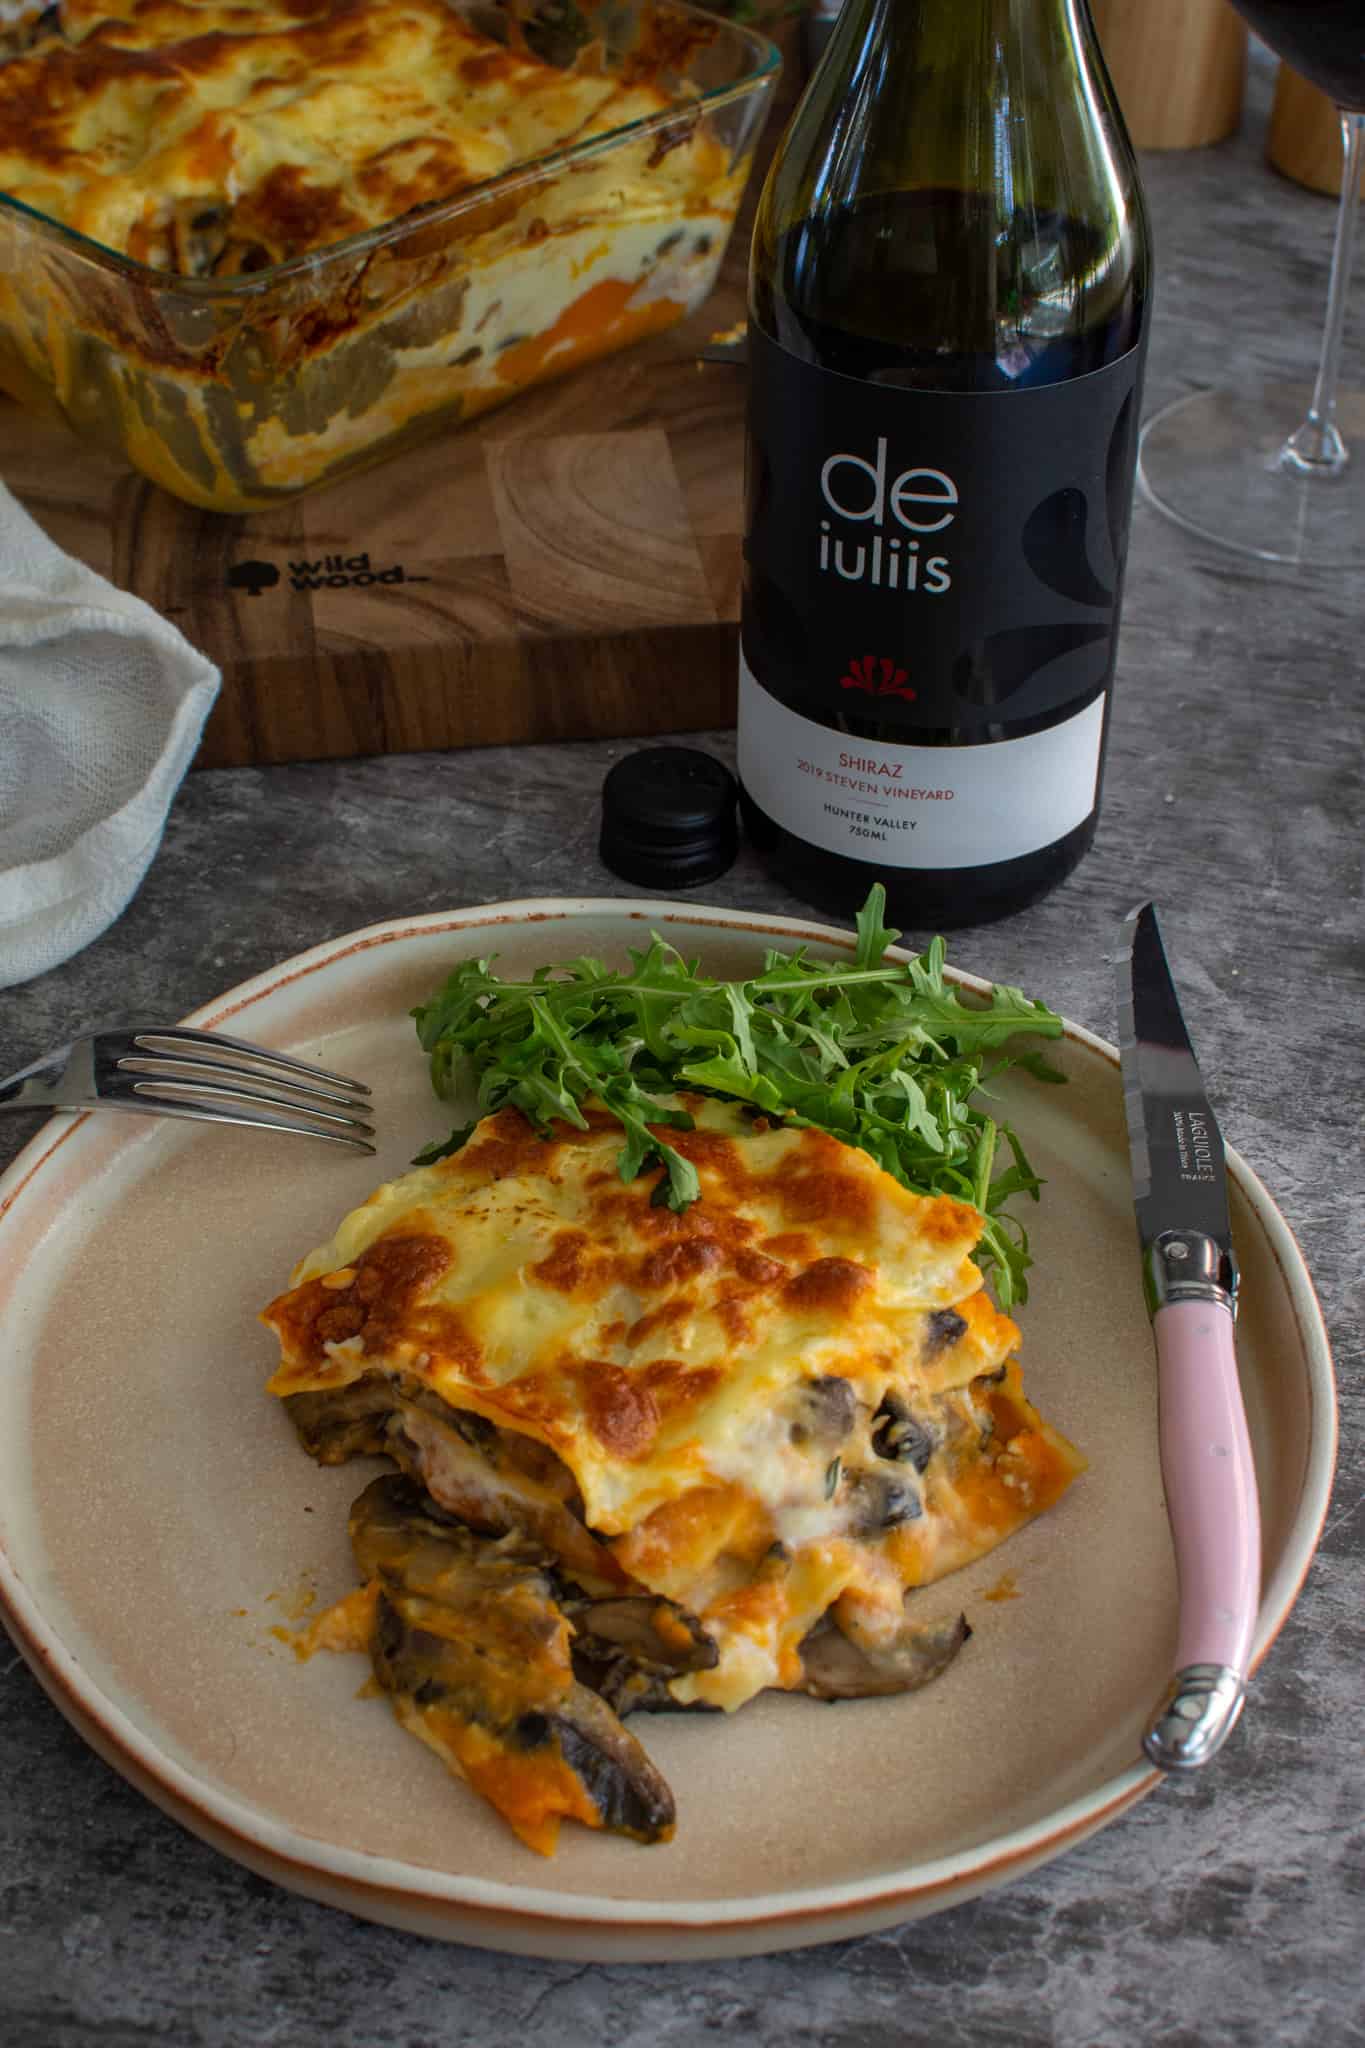 Vegetable lasagne on a plate with a small bit of rocket salad too.  De iuliis wine beside it with lasagne dish in background 